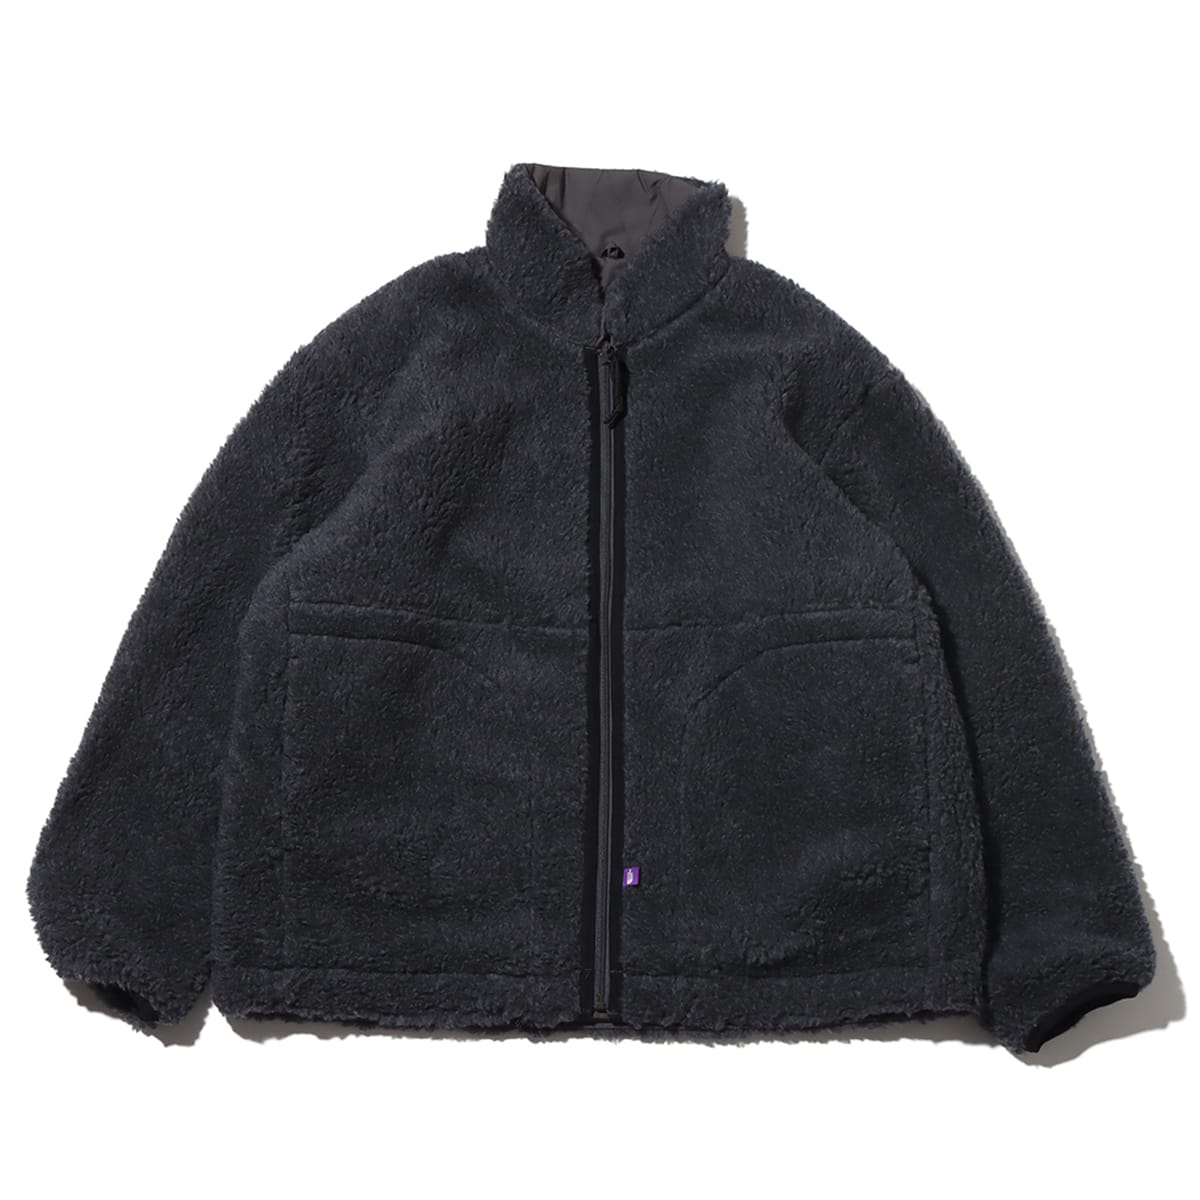 THE NORTH FACE PURPLE LABEL Wool Boa Field Reversible Jacket Mix ...